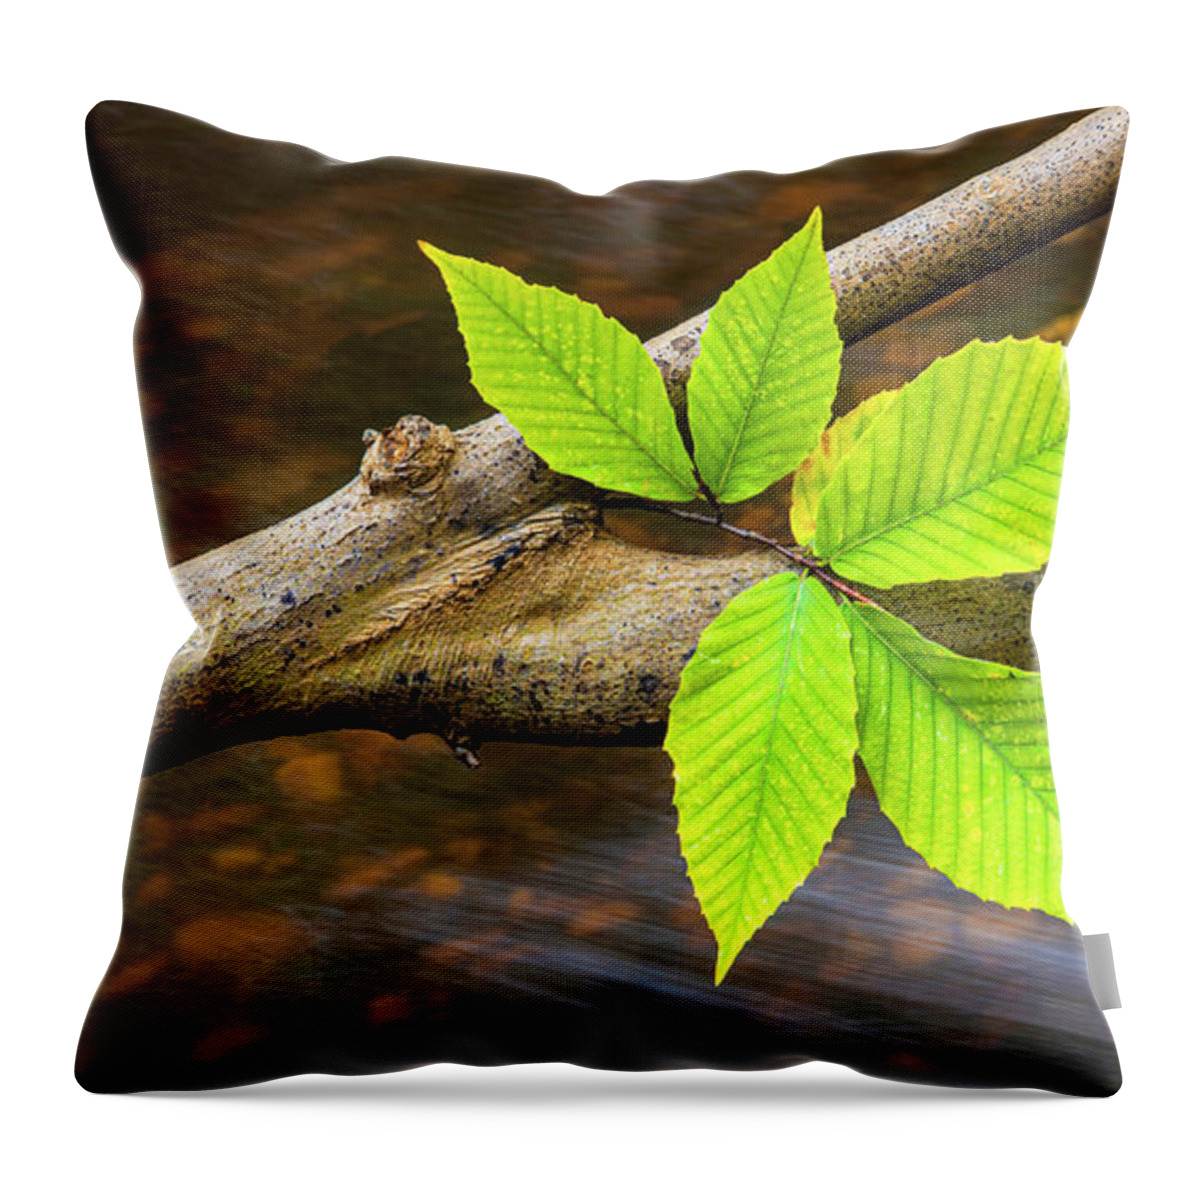 Autumn Throw Pillow featuring the photograph Autumn Leaf On Fallen Branch by Gary Slawsky